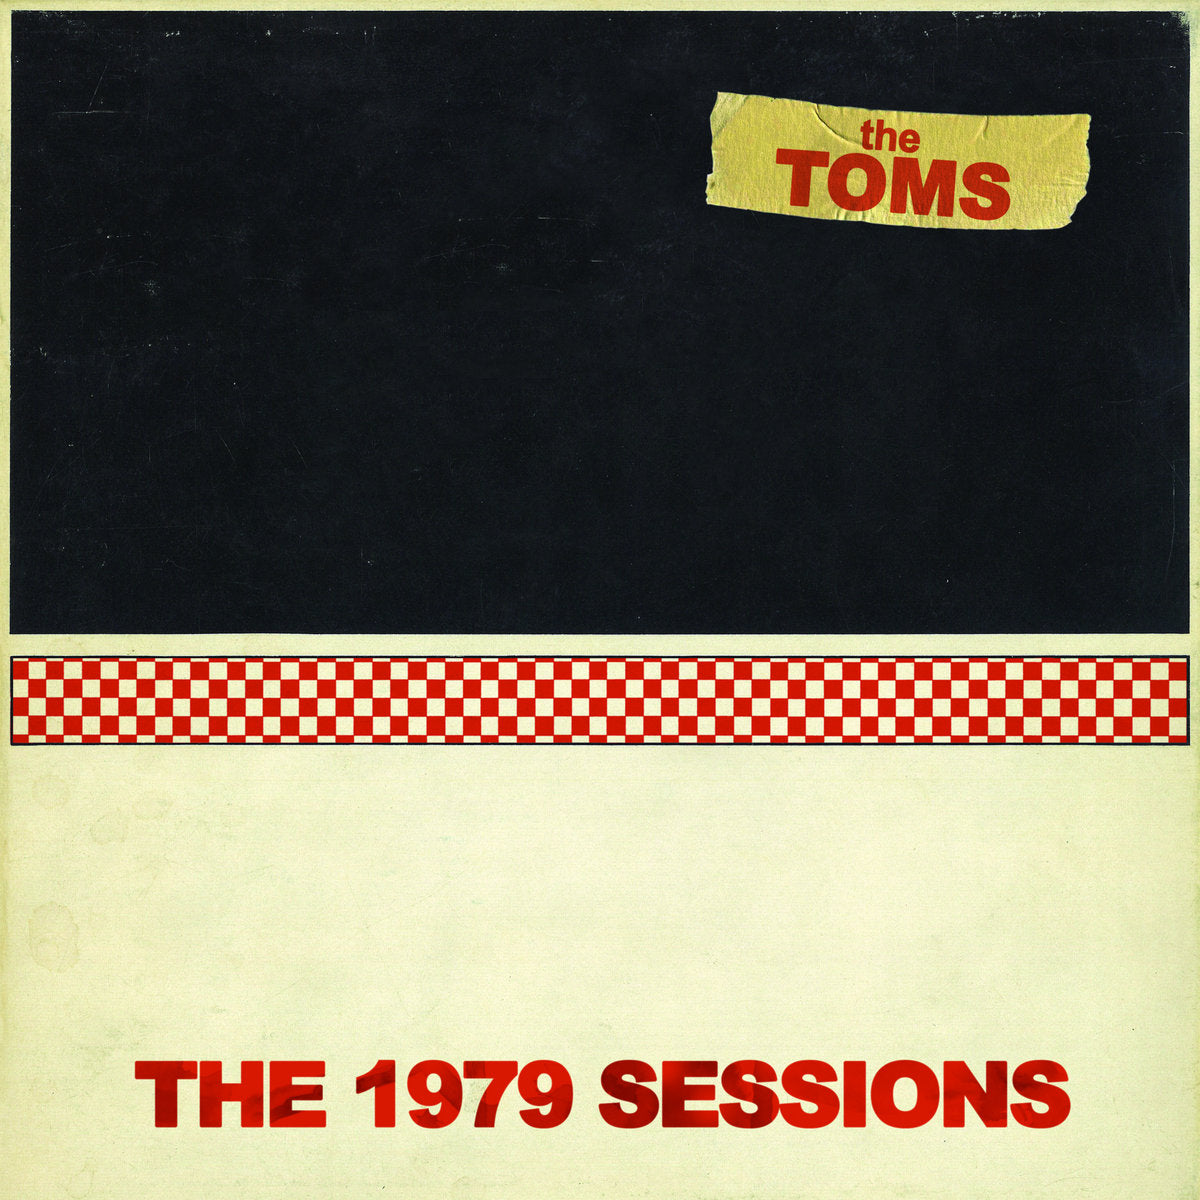 THE TOMS - "THE 1979 SESSIONS" LP